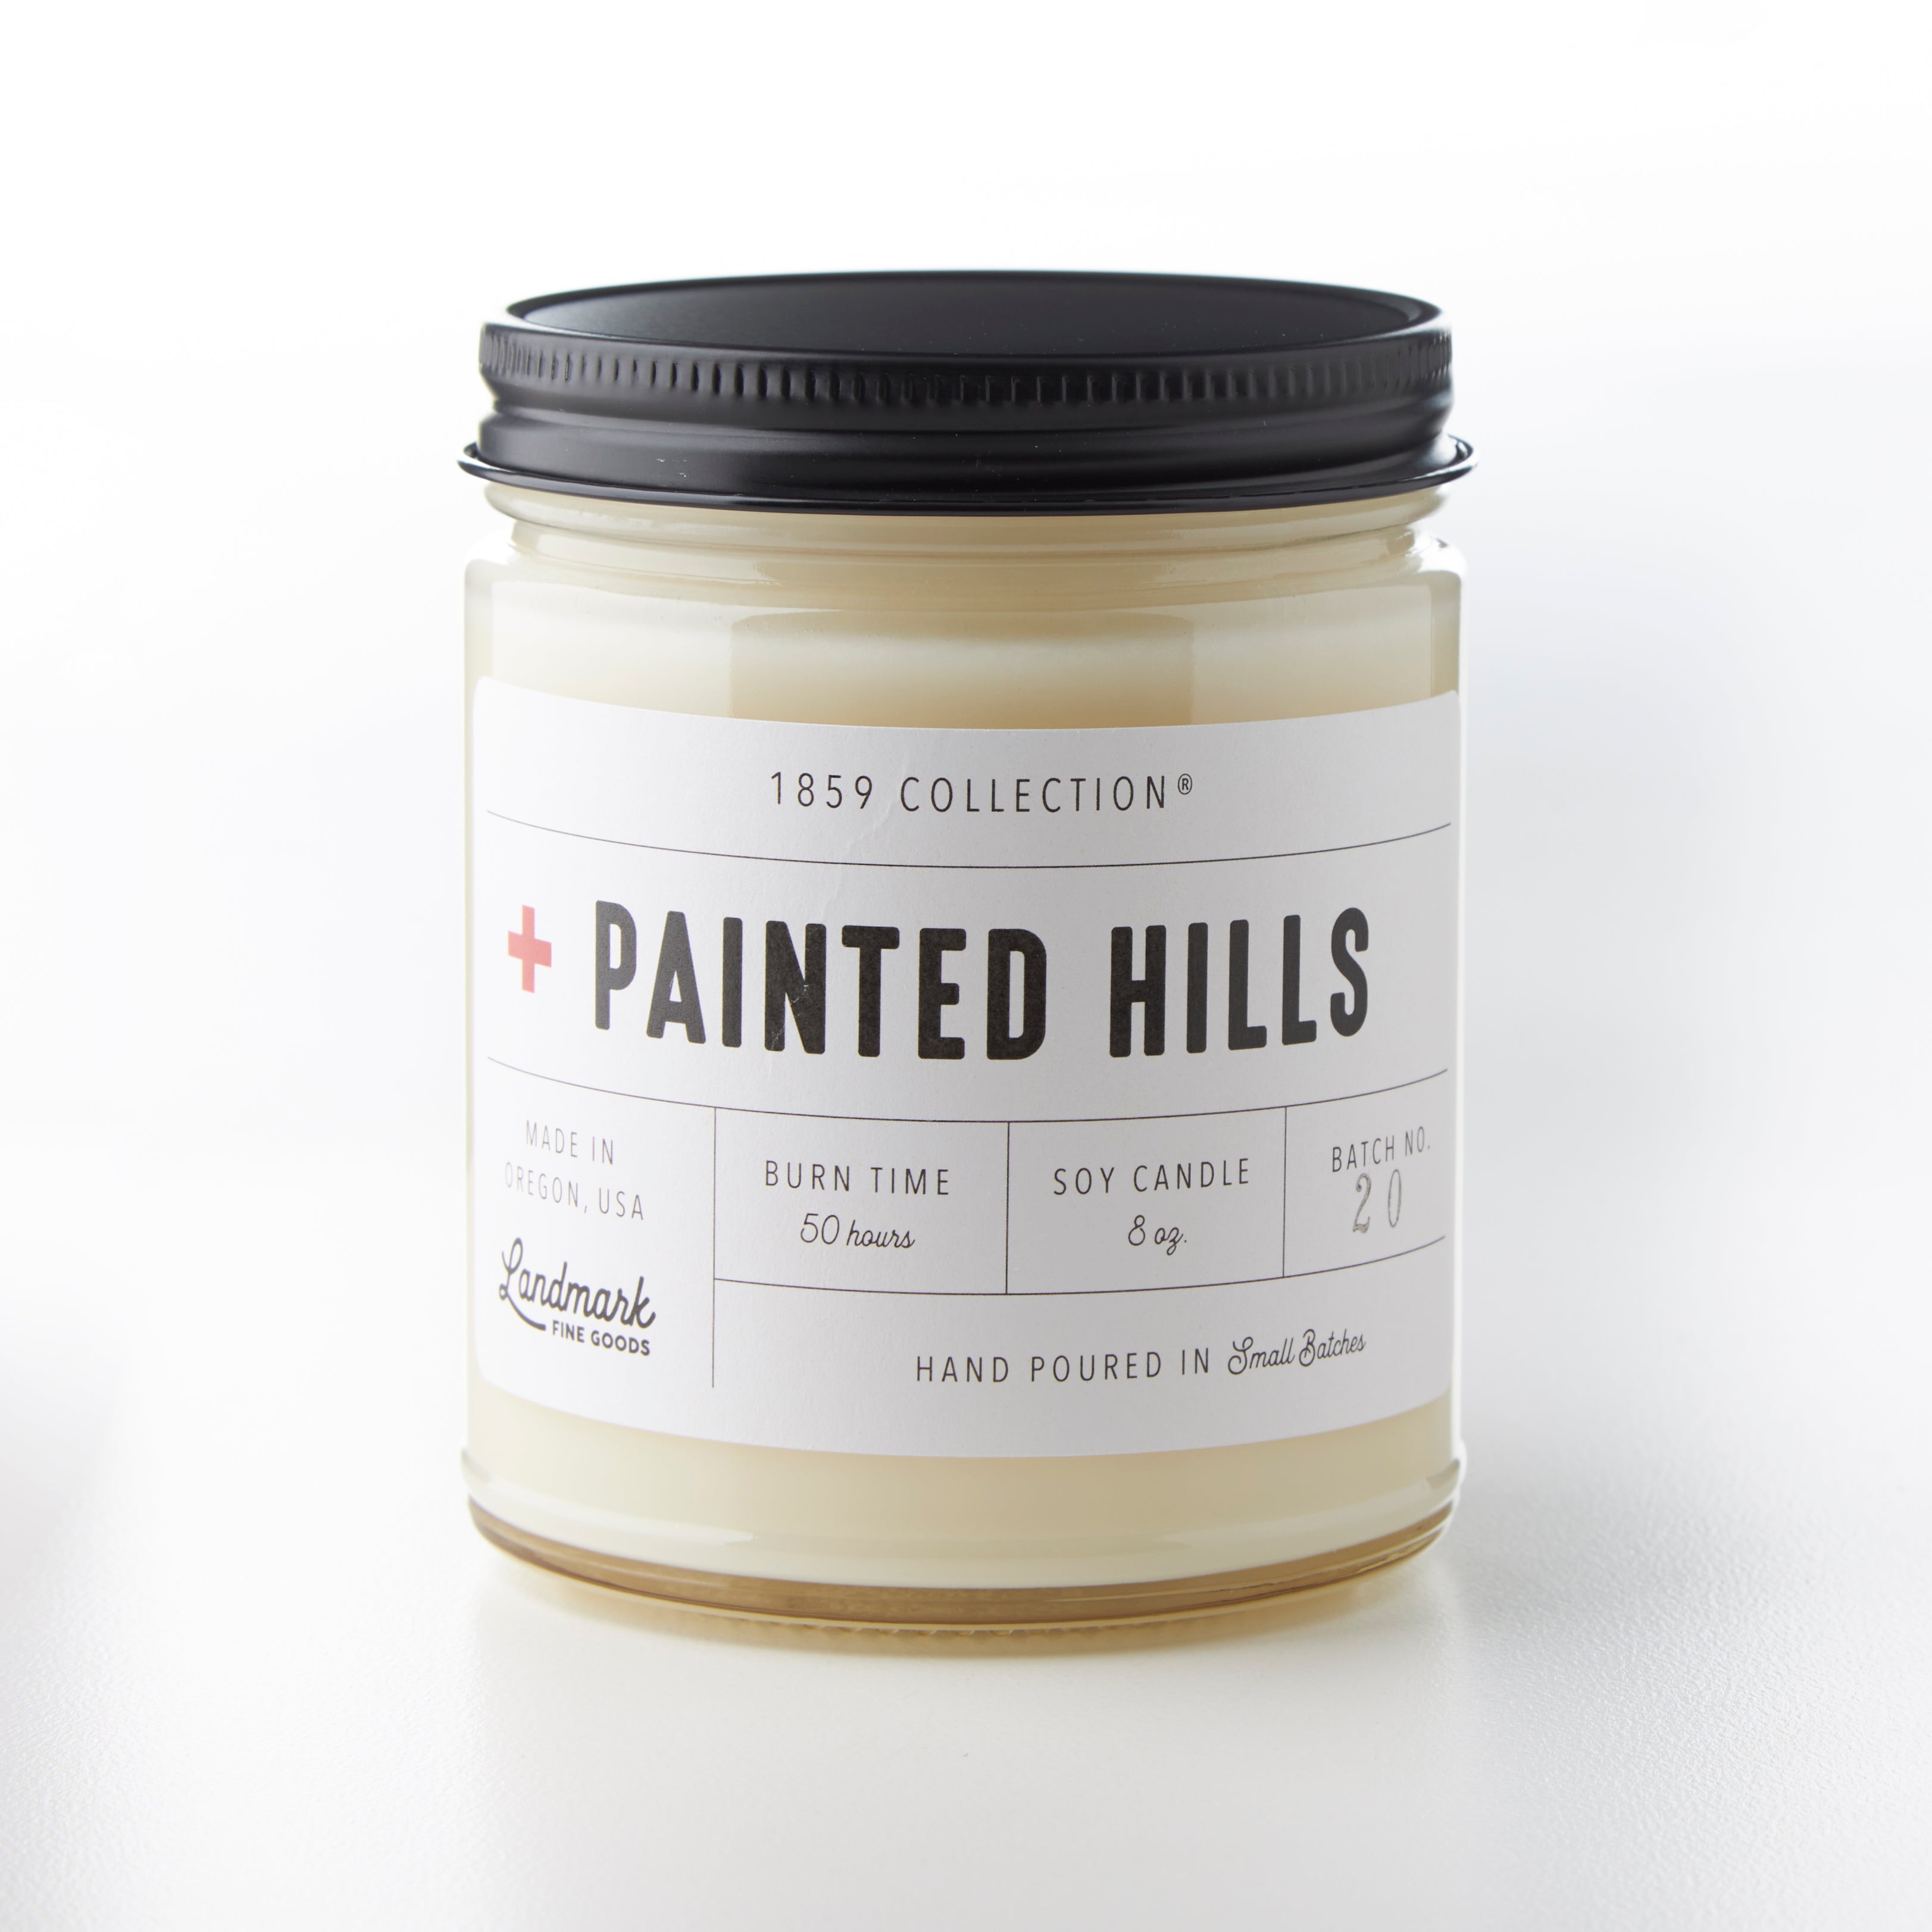 Painted Hills Candle - 1859 Collection®